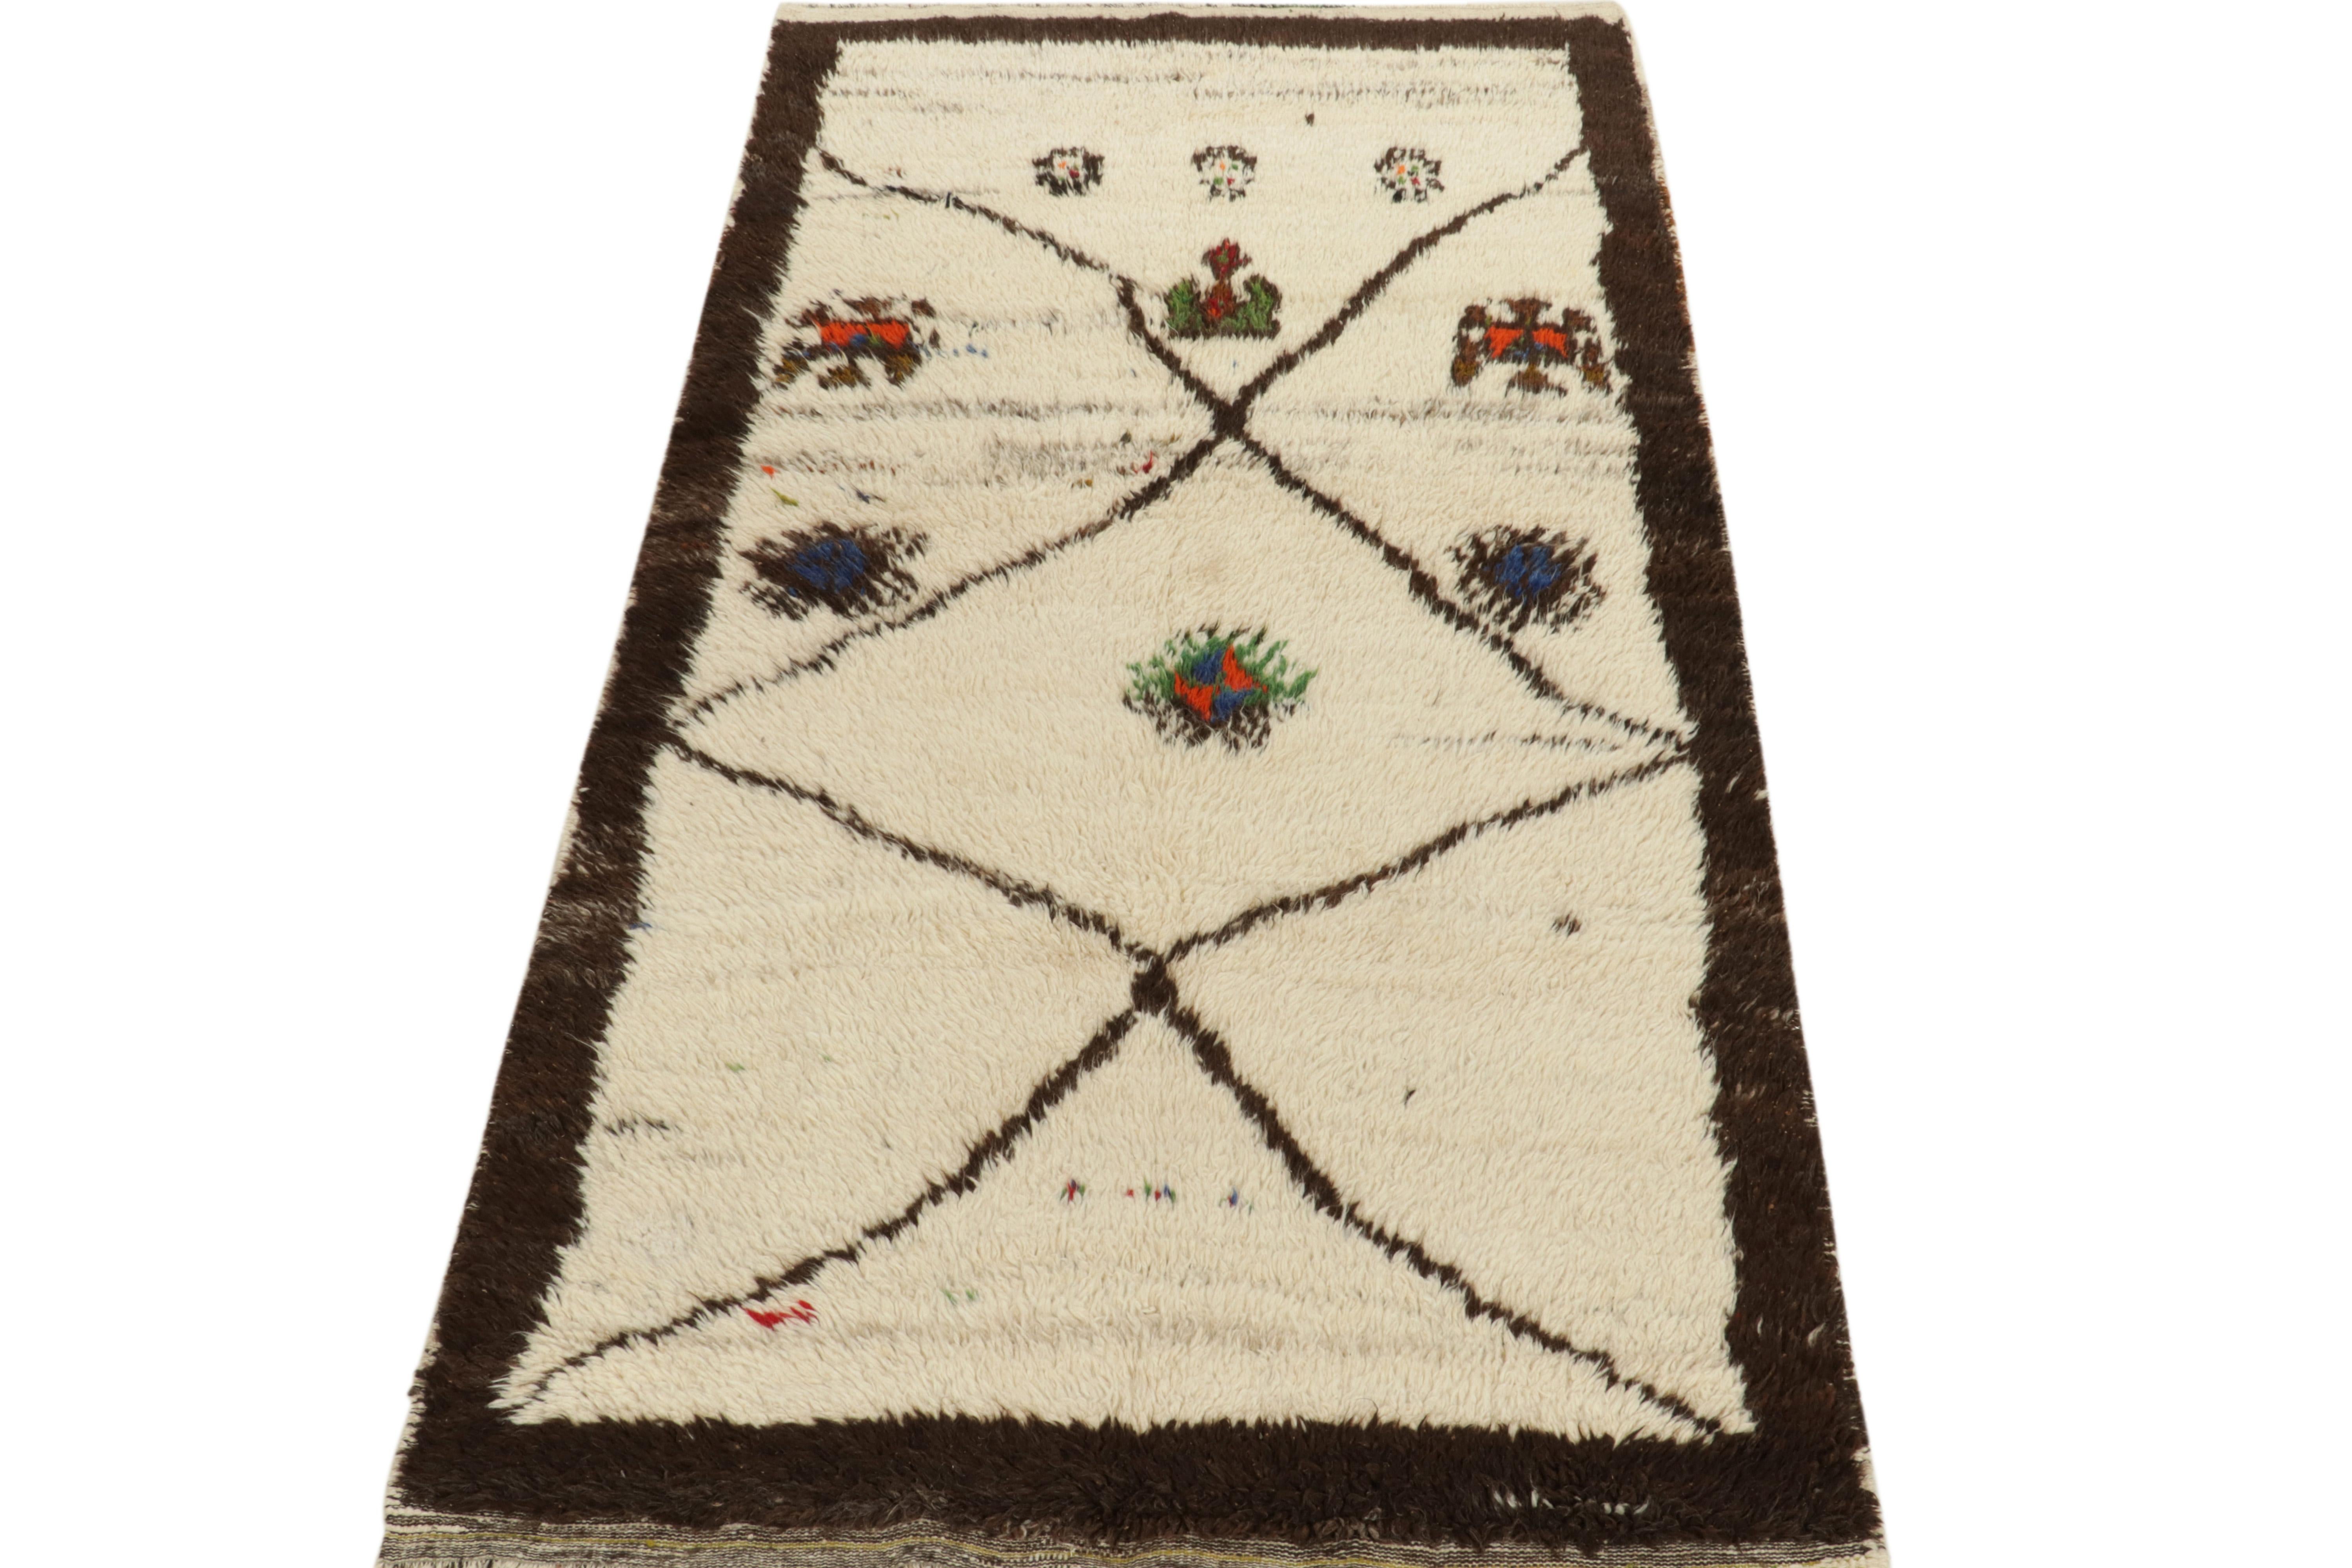 This vintage 4×8 Tulu rug is a new addition to Rug & Kilim’s mid-century tribal curations. Hand-knotted in wool, it originates from Turkey circa 1950-1960.

This provenance is known for thick, lush pile and archaic designs like this rug’s play of